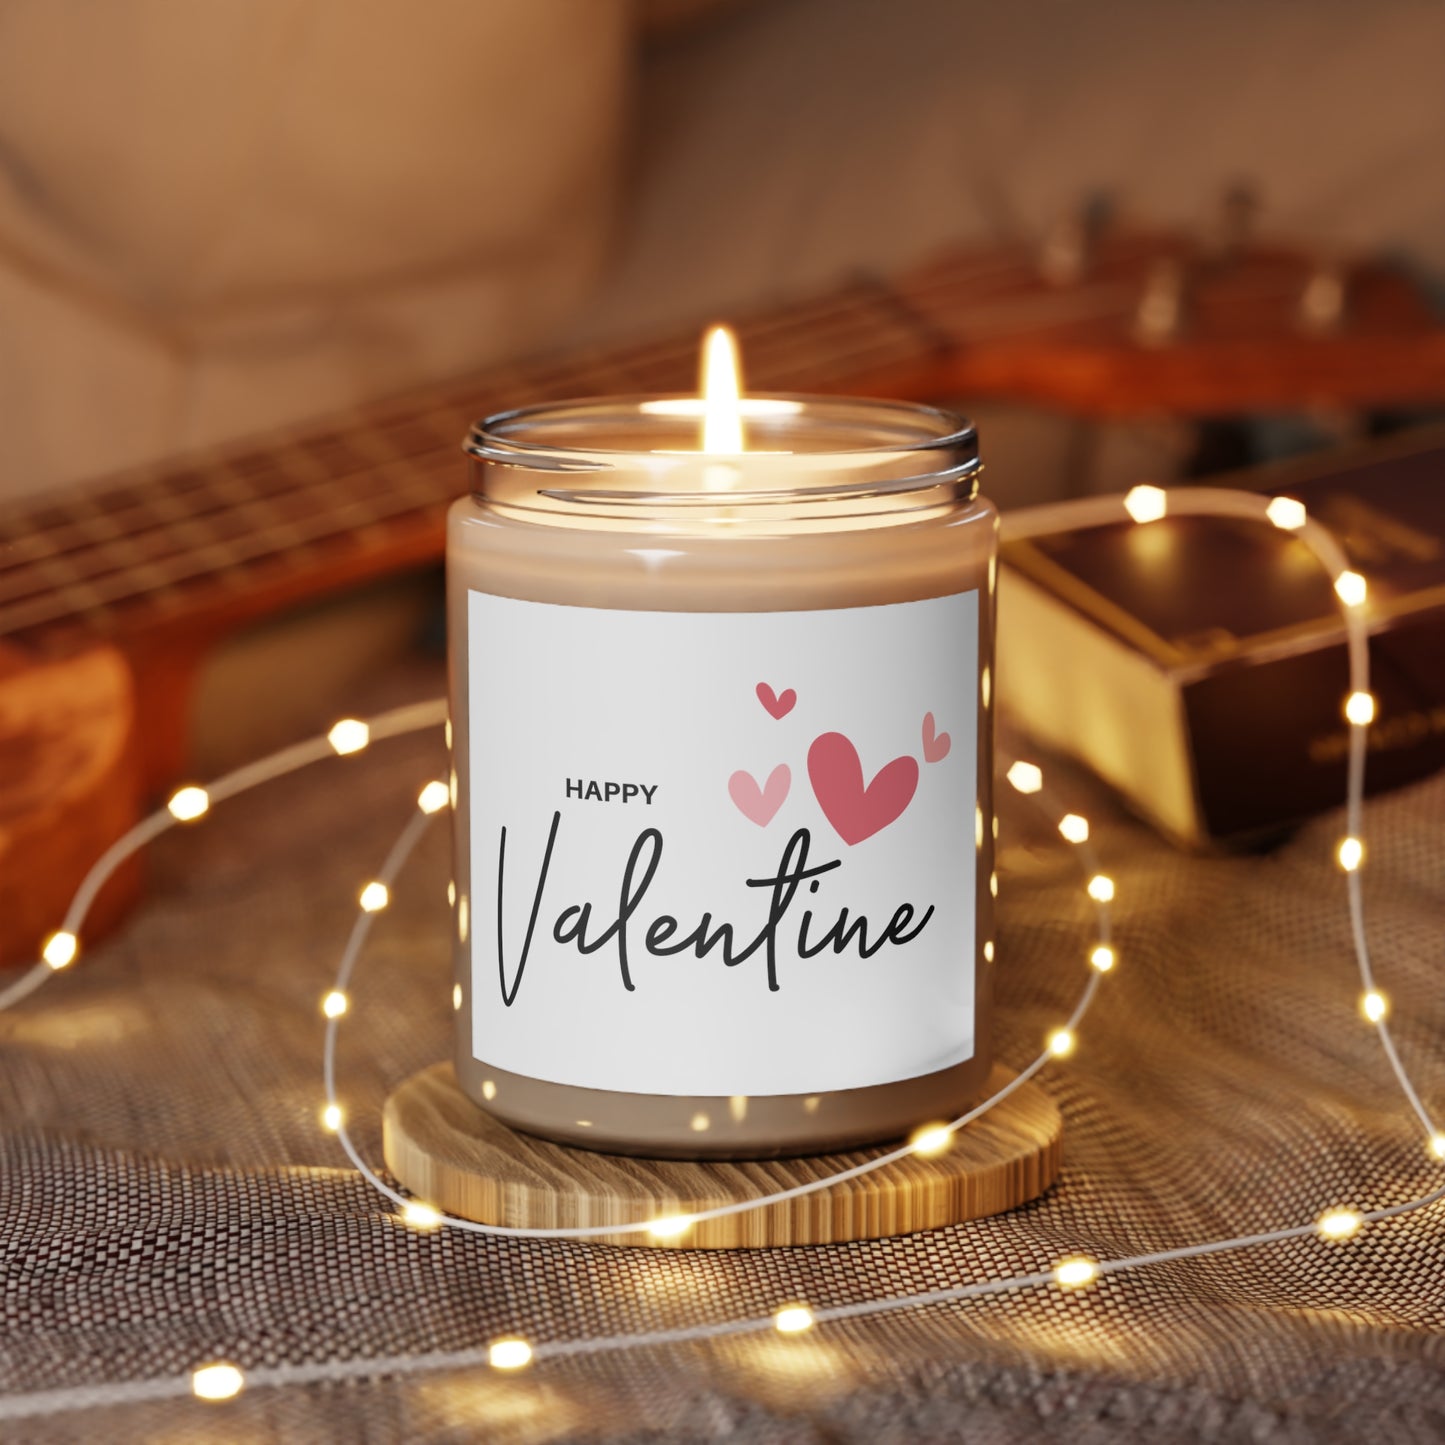 Gift for Her, Valentine's Scented Candle, Happy Valentine's Day with Flying Heart Printed Scanted Candles